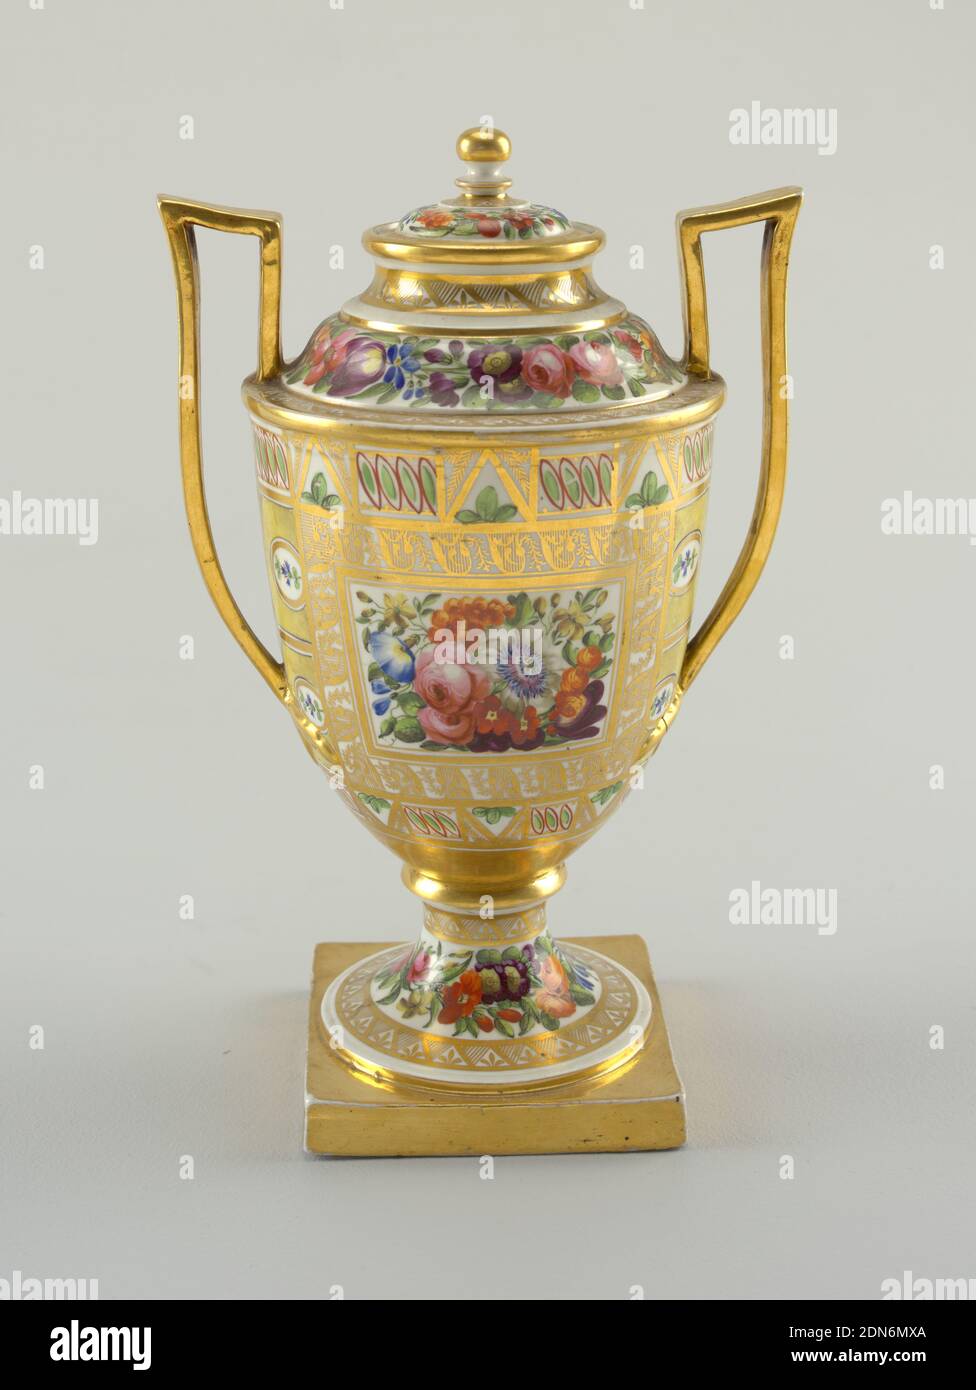 Urn with Gold and Flower Pattern, Royal Worcester, English, established 1751, porcelain, vitreous enamel, gold, Semi-ovoid, with domed top, raised strap handles and square base. Geometric design on body with square reserve on front, containing flowers. Floral bands about foot, foot bolted to body, top and cover. Gilding throughout., England, ca. 1795, ceramics, Decorative Arts, urn, urn Stock Photo